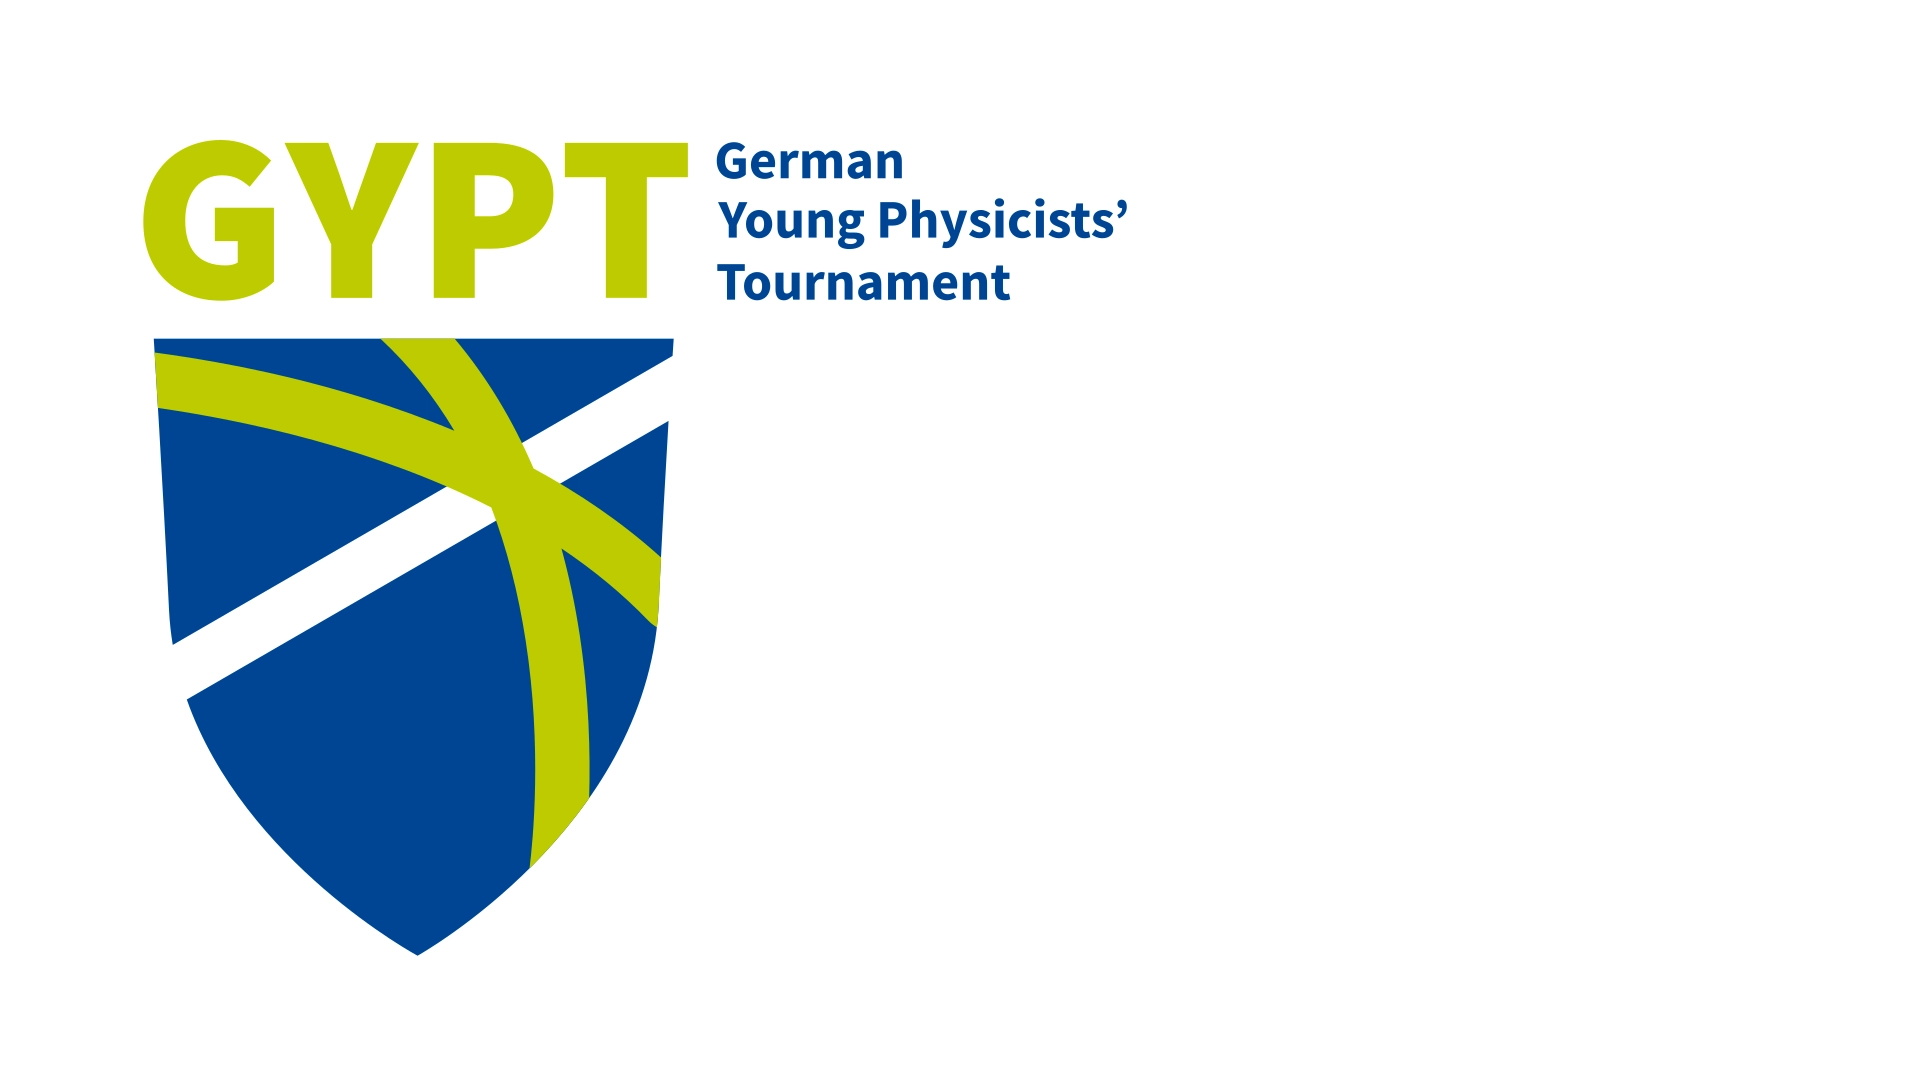 Erfolge beim "German Young Physicists' Tournament"